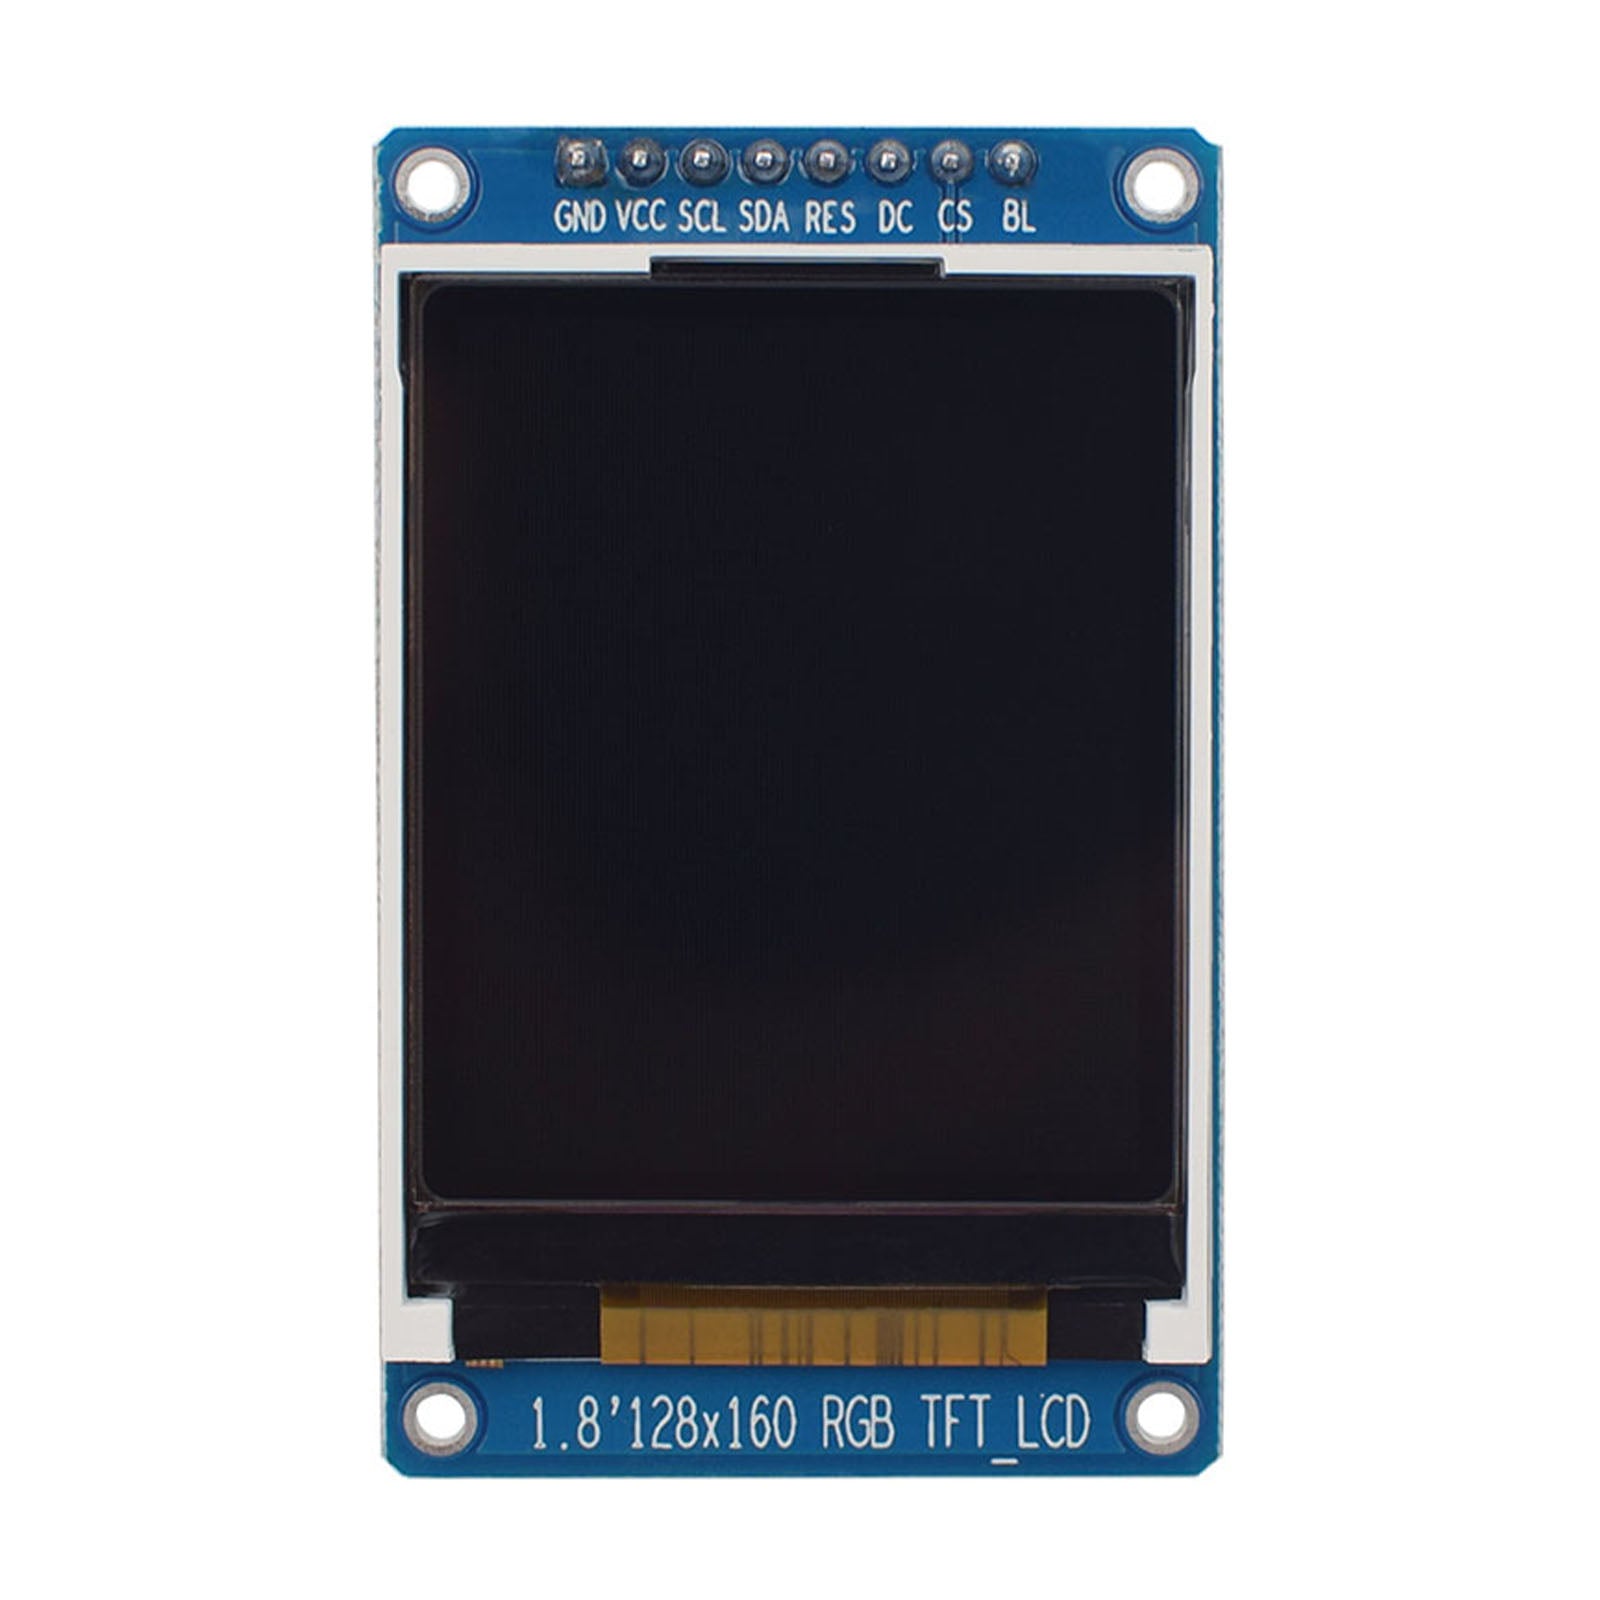 1.8-inch TFT High Brightness Display with a resolution of 128 by 160 pixels, boasting 1800 nits brightness, interfaced with SPI